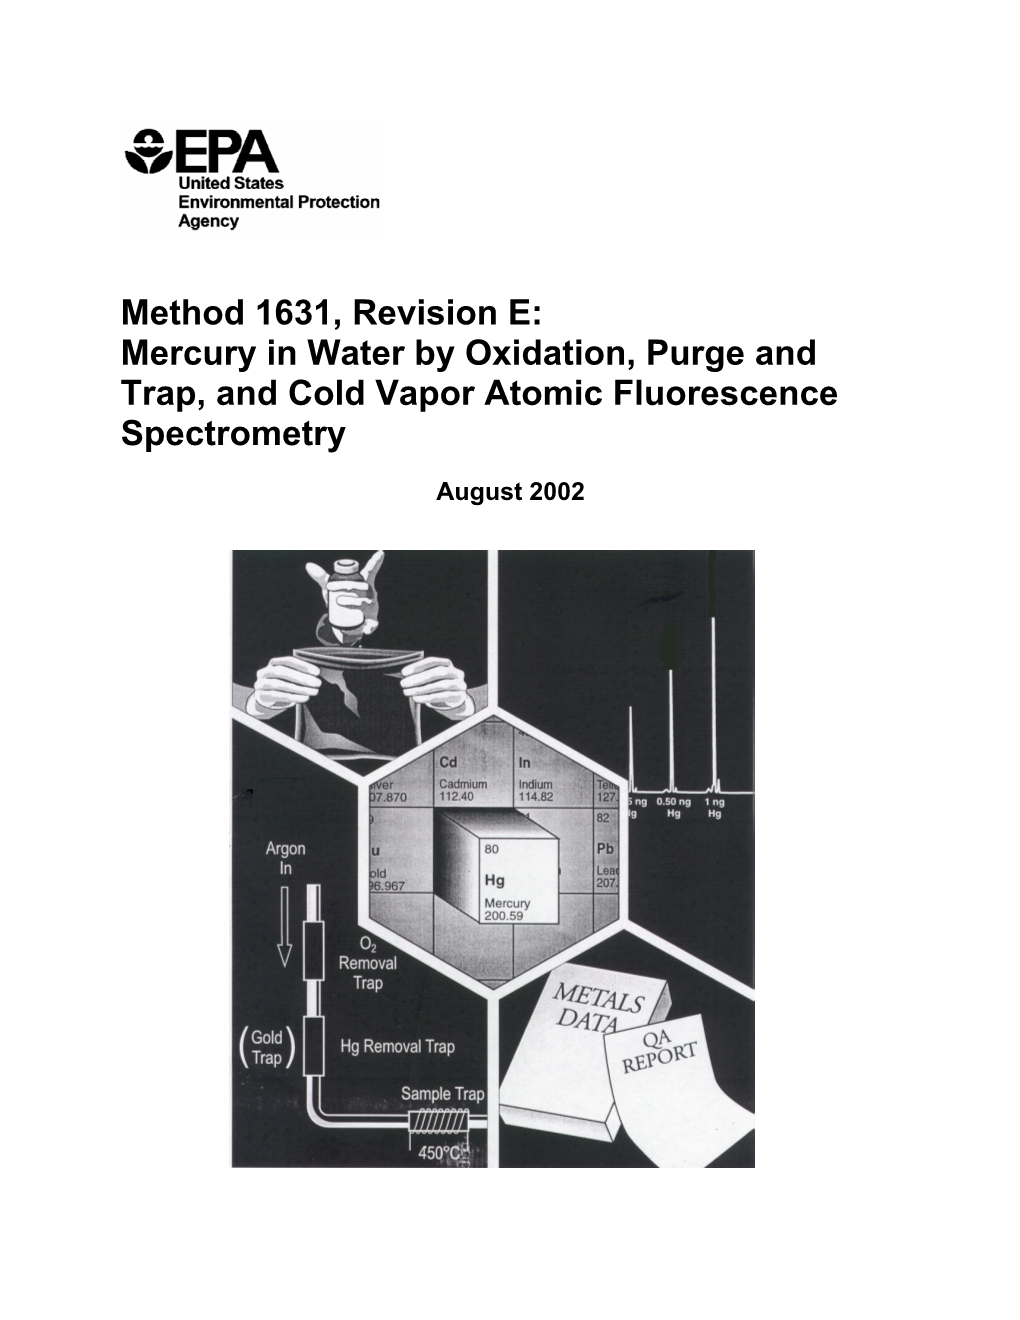 Method 1631, Revision E: Mercury in Water by Oxidation, Purge and Trap, and Cold Vapor Atomic Fluorescence Spectrometry